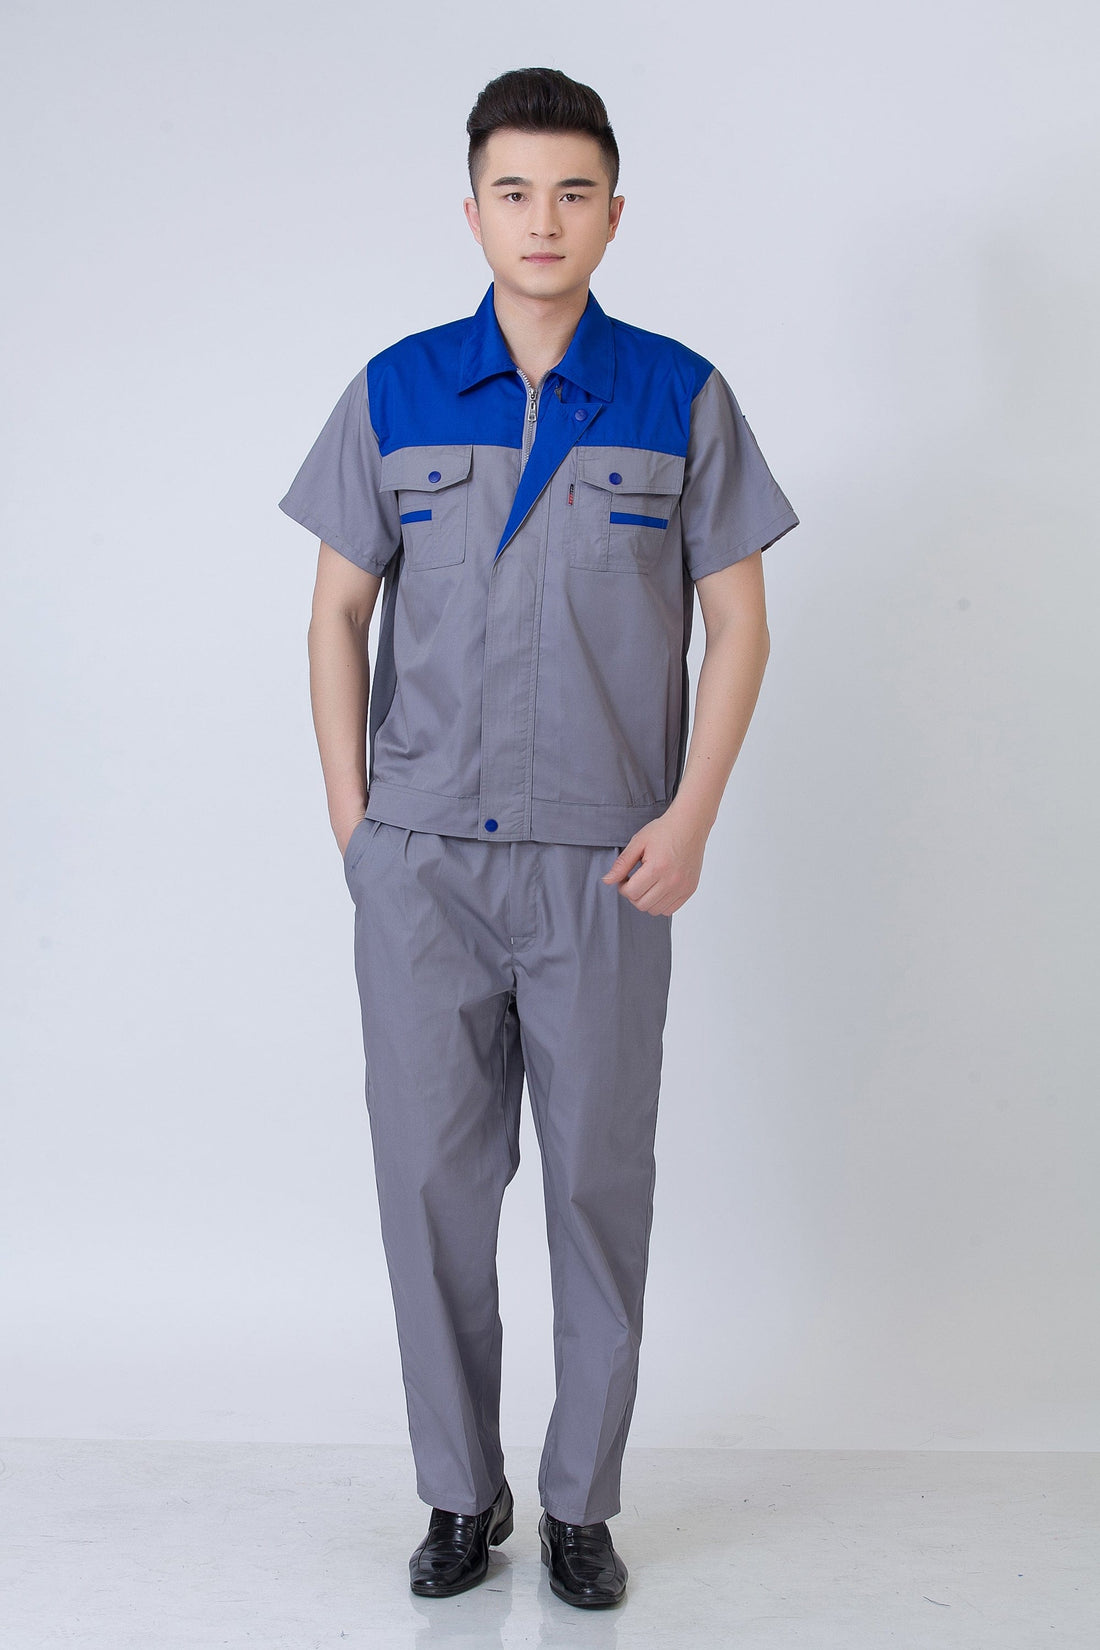 Corals Trading Co. 可樂思百貨商行 涤棉 Short-sleeved polyester cotton overalls for summer SD-S2404